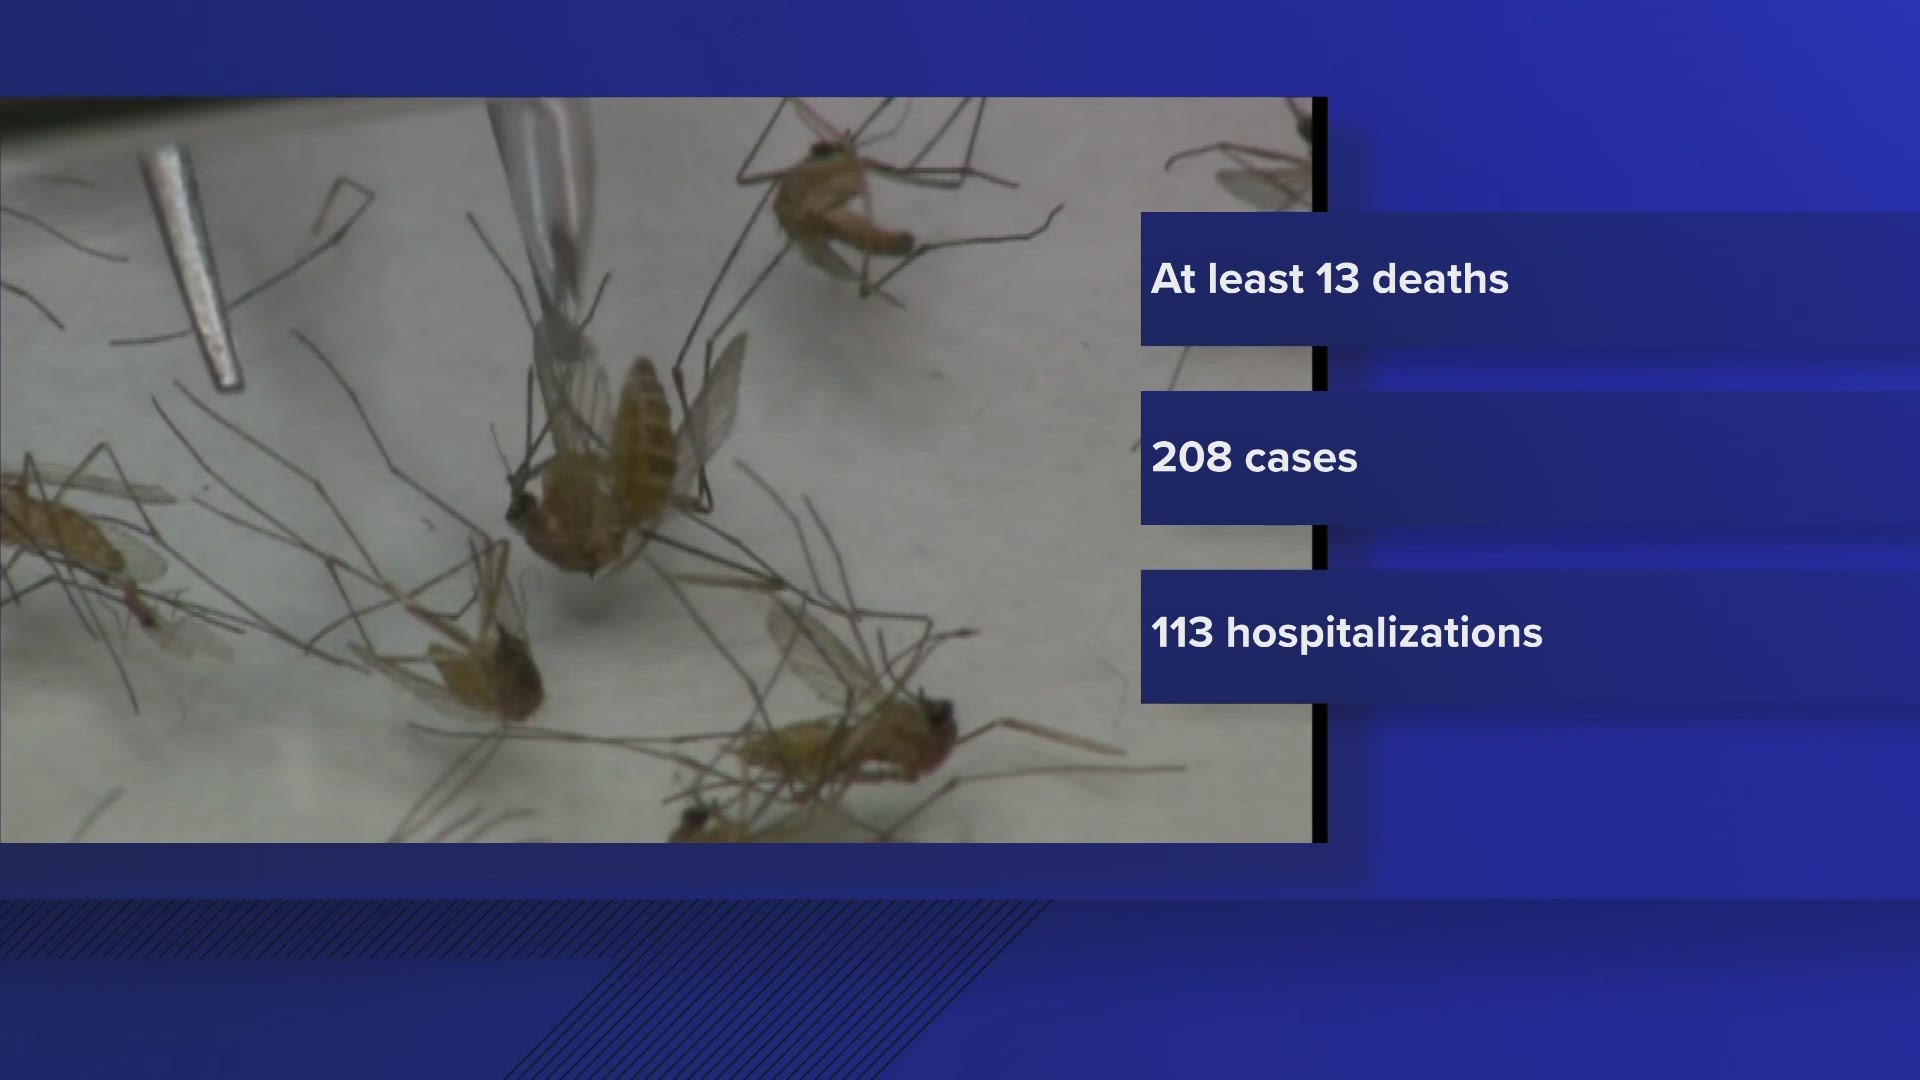 CDPHE has reported 208 human cases of West Nile virus and 13 deaths in Colorado as of Wednesday.